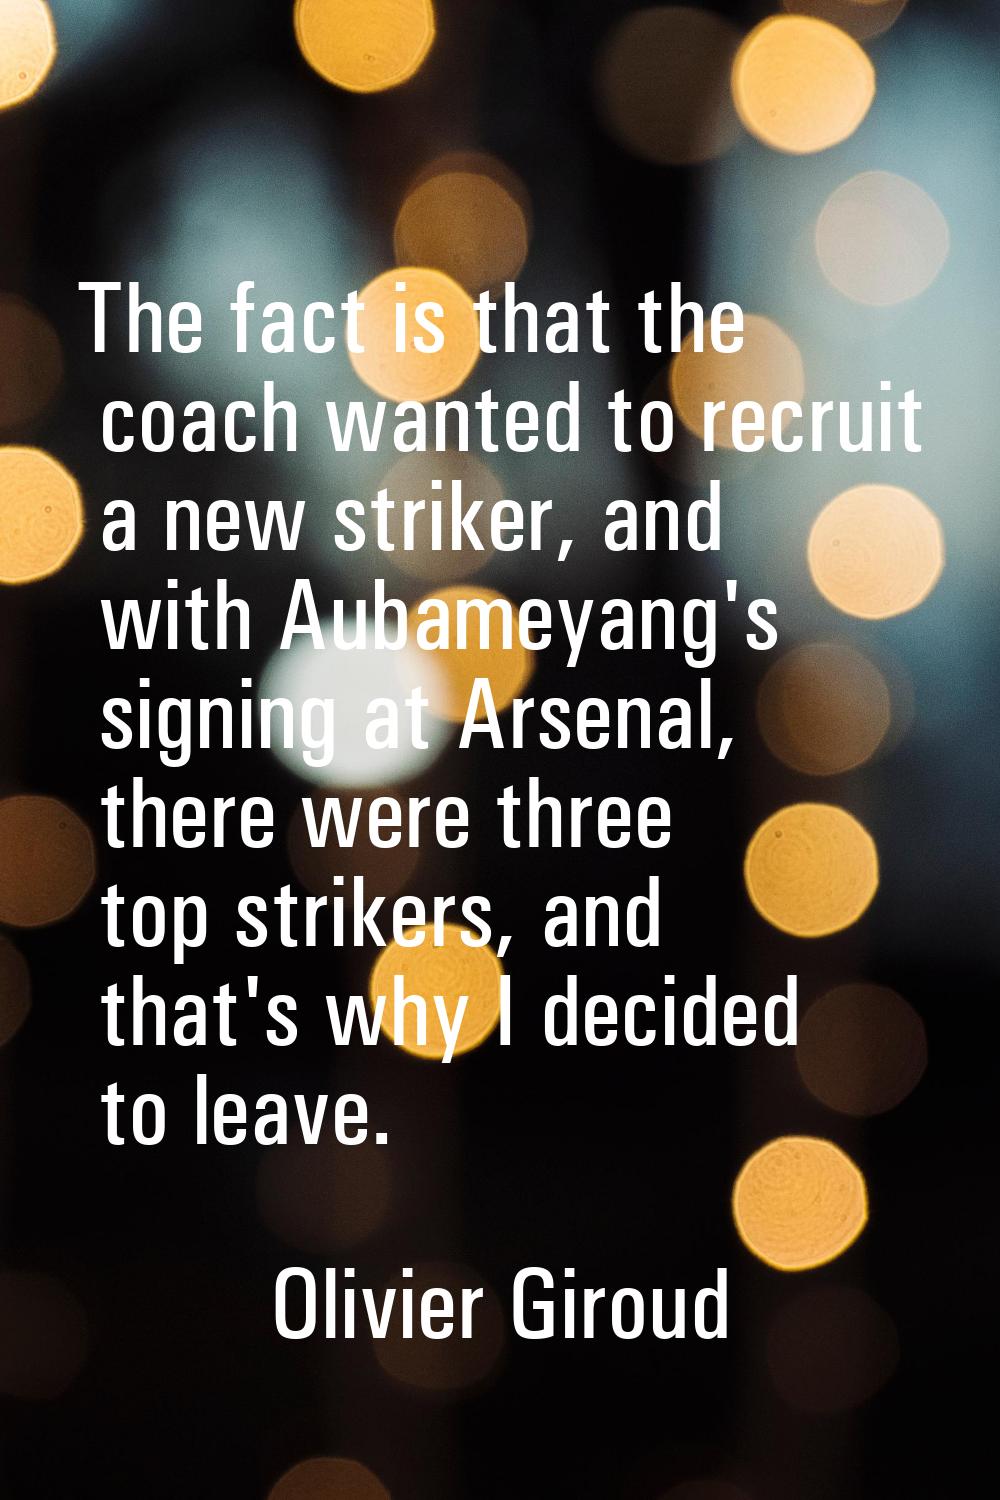 The fact is that the coach wanted to recruit a new striker, and with Aubameyang's signing at Arsena